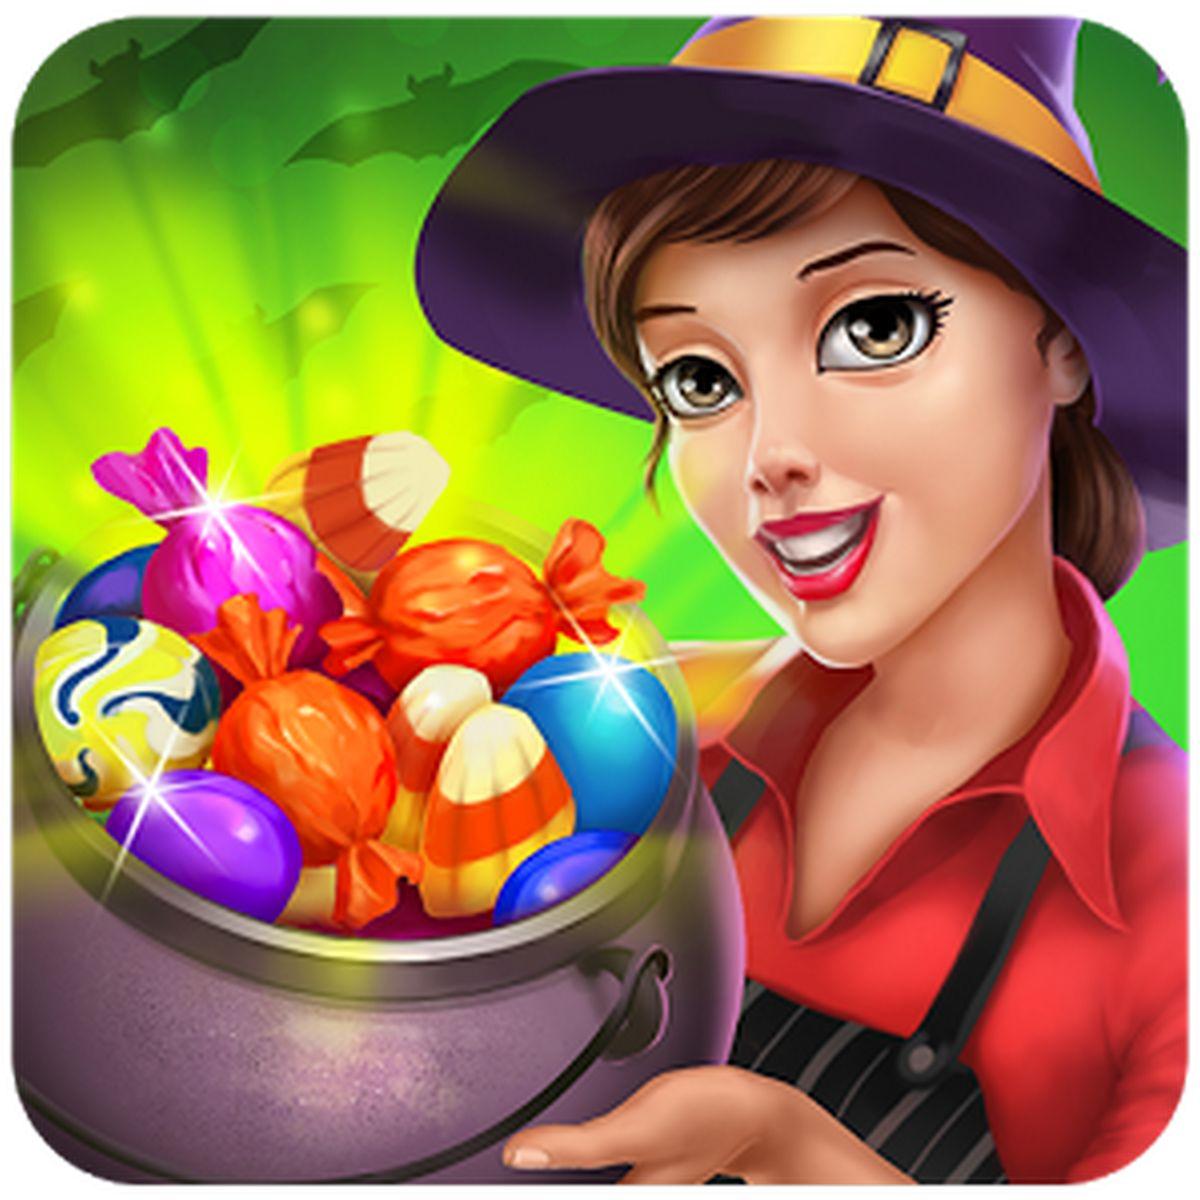 Food Truck Chef™ Cooking Game APK MOD